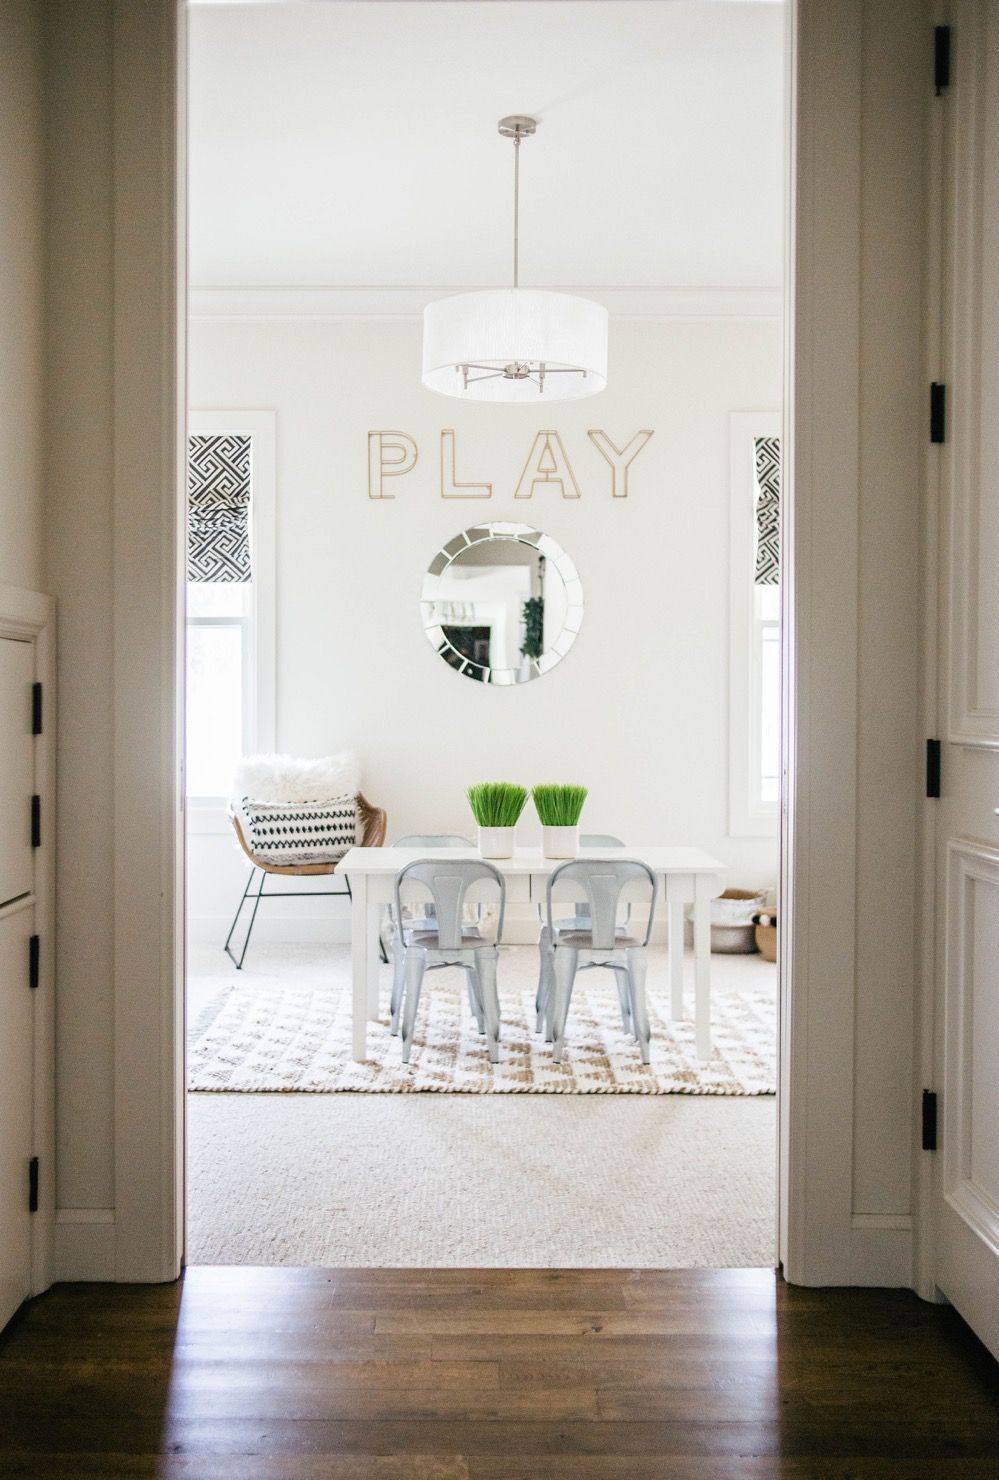 Awesome Playroom Decorating Ideas for Kids | Curls and Cashmere -   16 room decor Kids awesome ideas